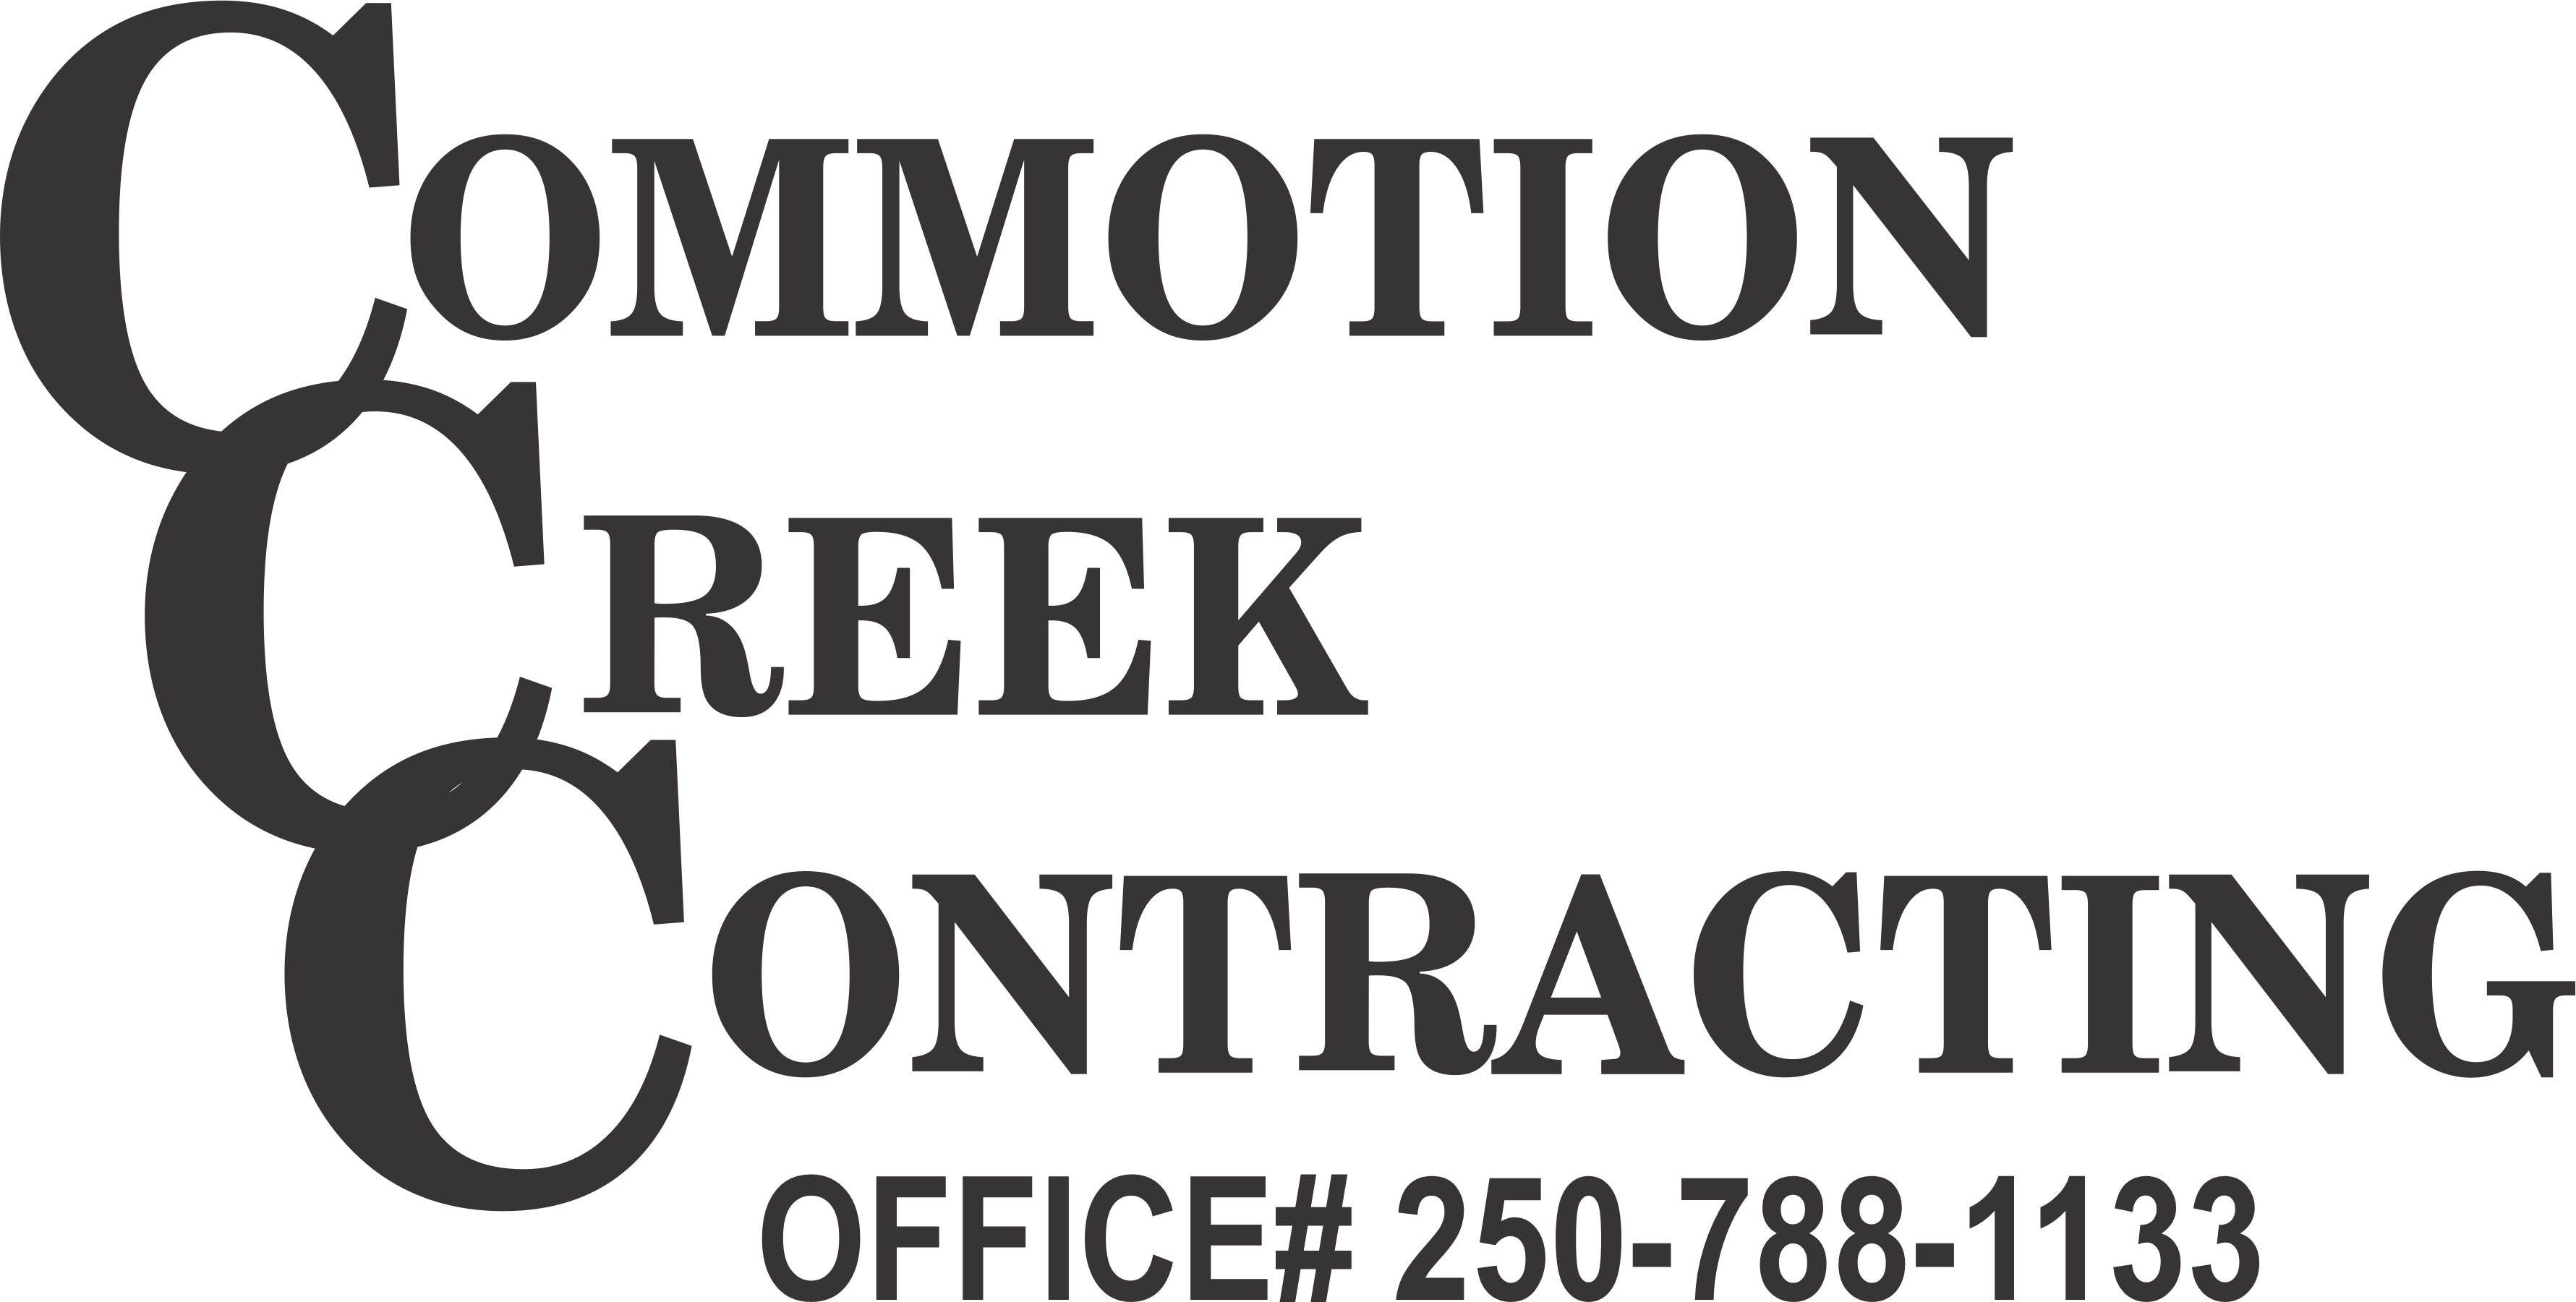 Commotion Creek Contracting